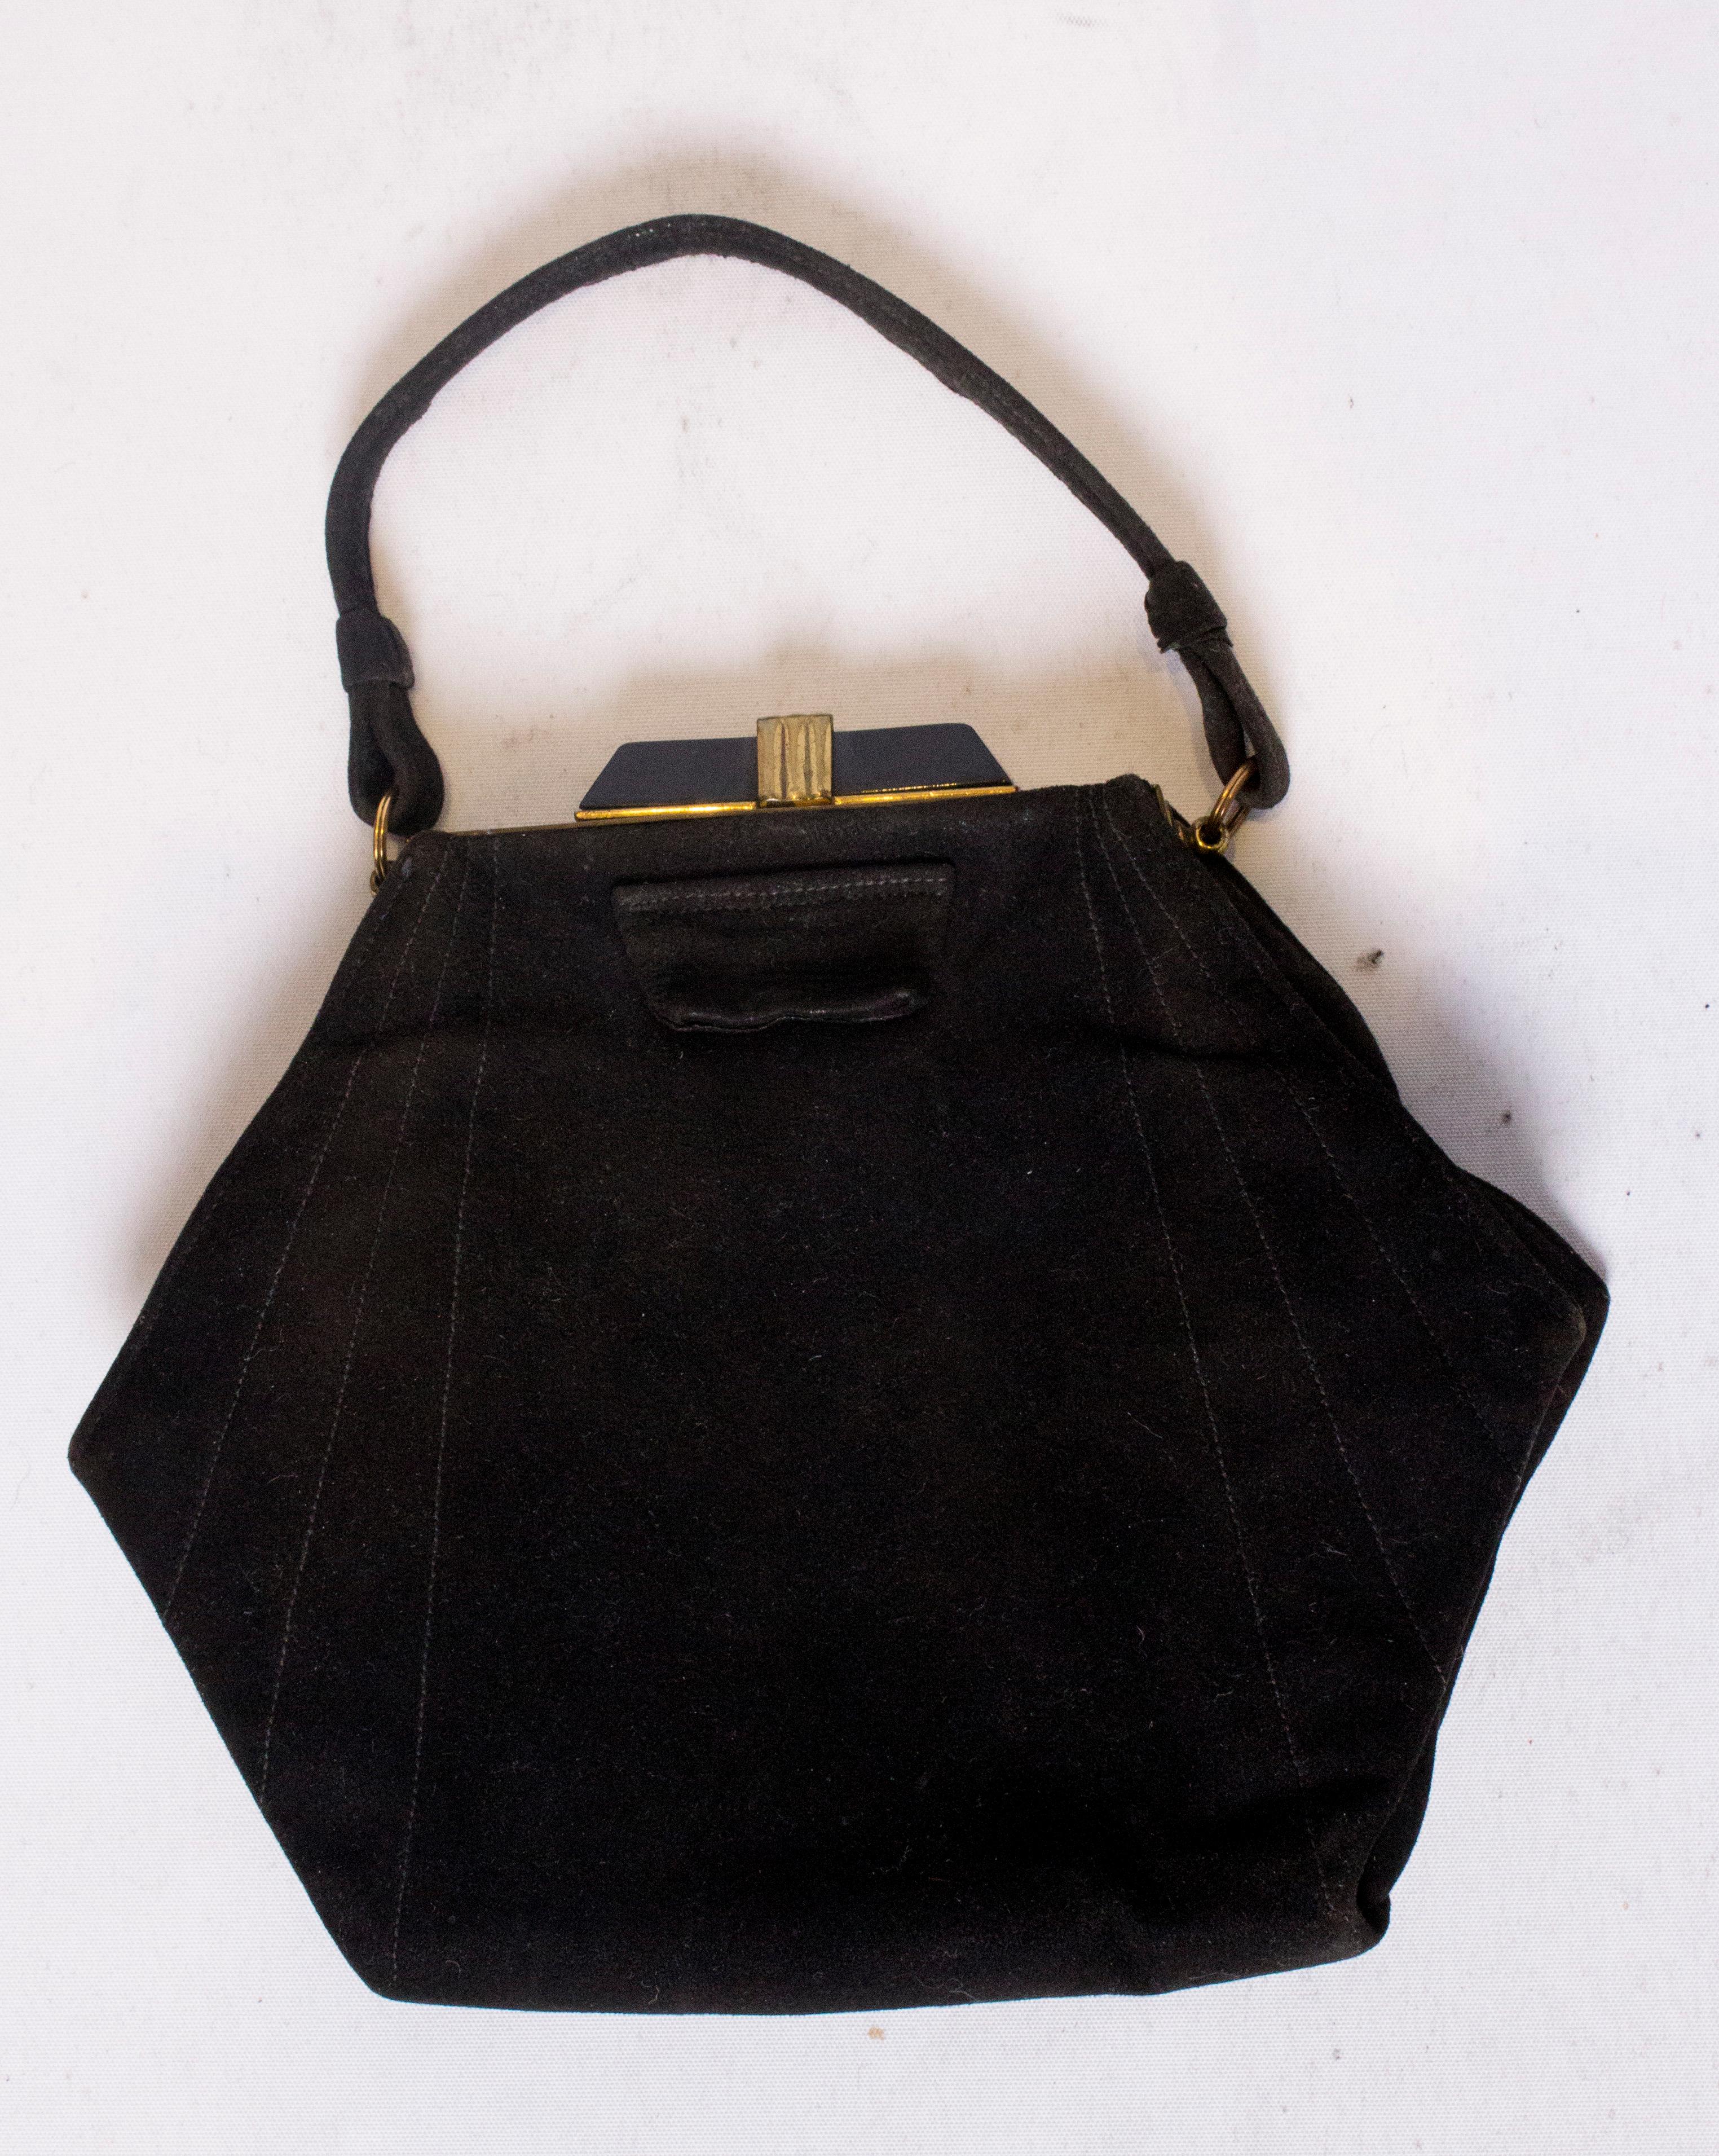 A chic hexaganol shape Art Deco handbag in black suede. The bag has a decorative art deco clasp and is lined in fabric with one internal pouch pocket and integrated purse.
Measurements: width 8'', height 7'', depth 2''.